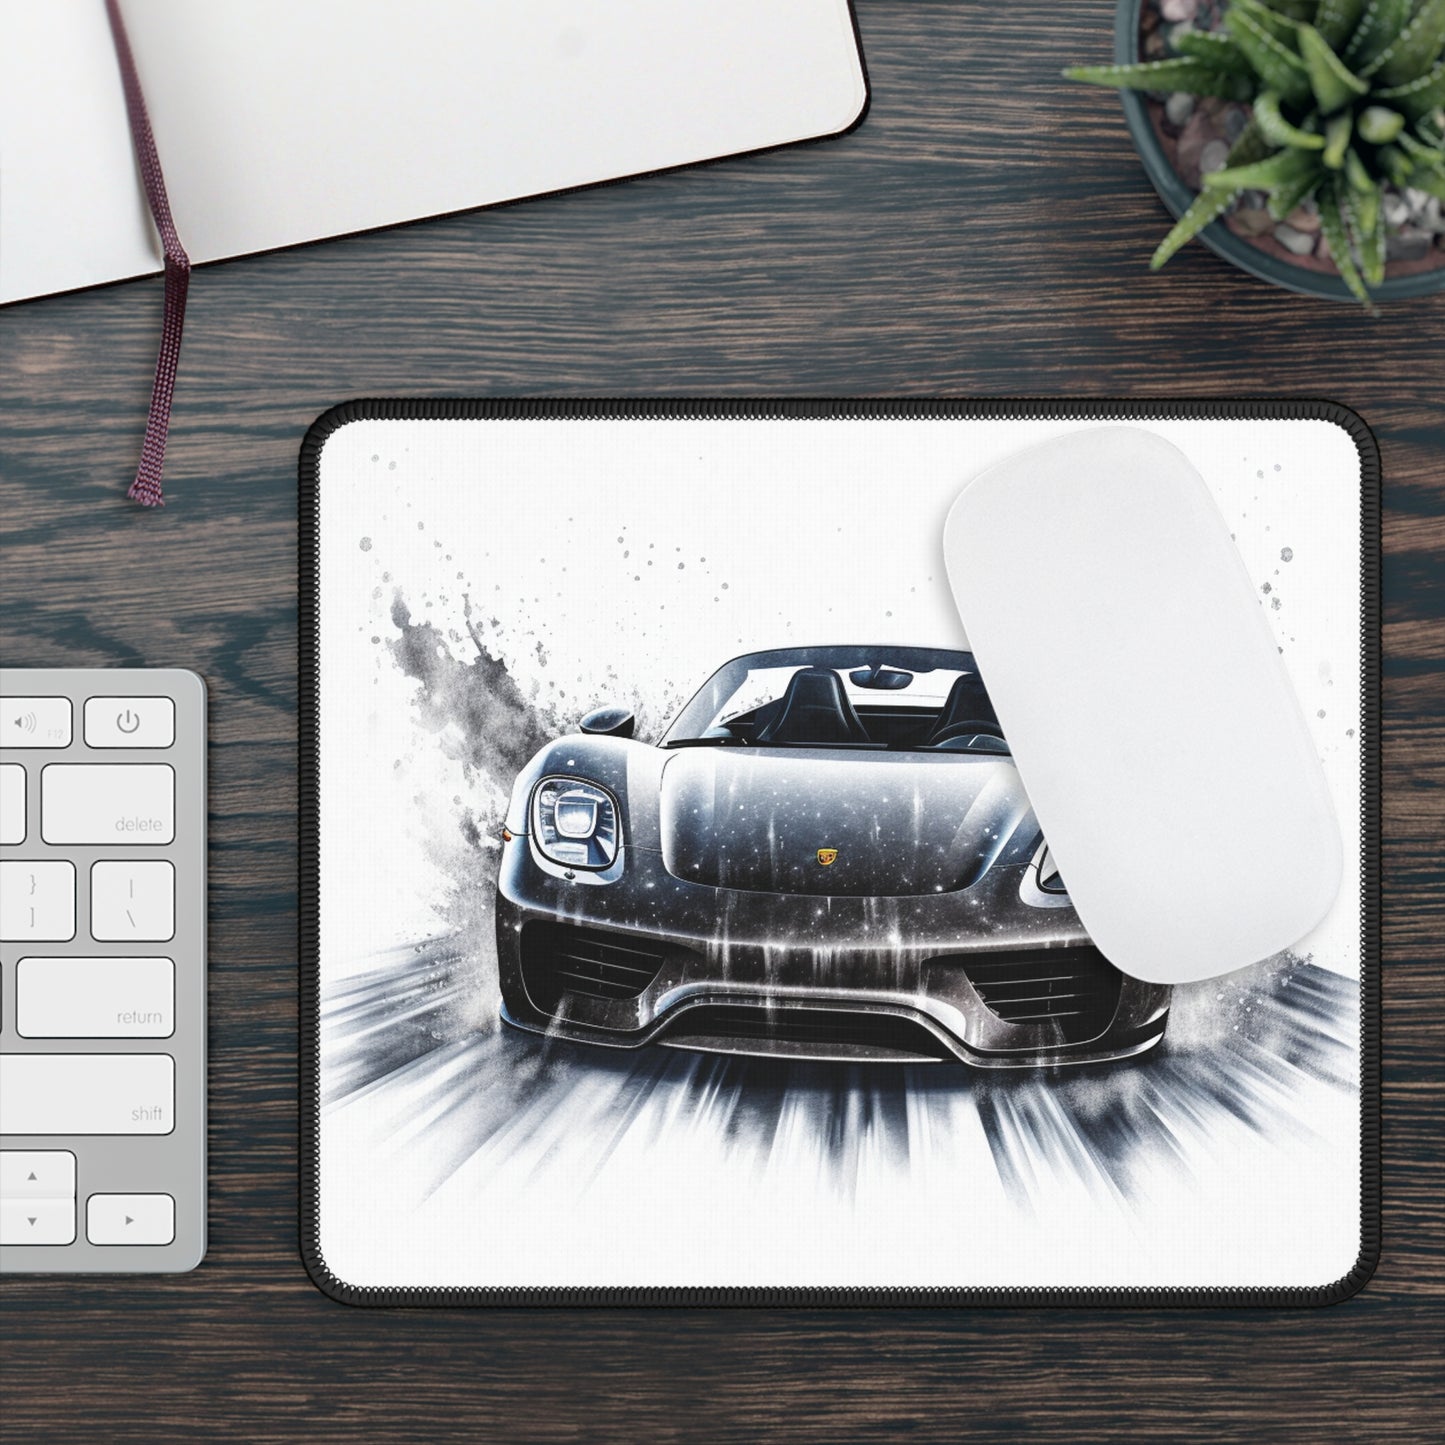 Gaming Mouse Pad  918 Spyder white background driving fast with water splashing 3